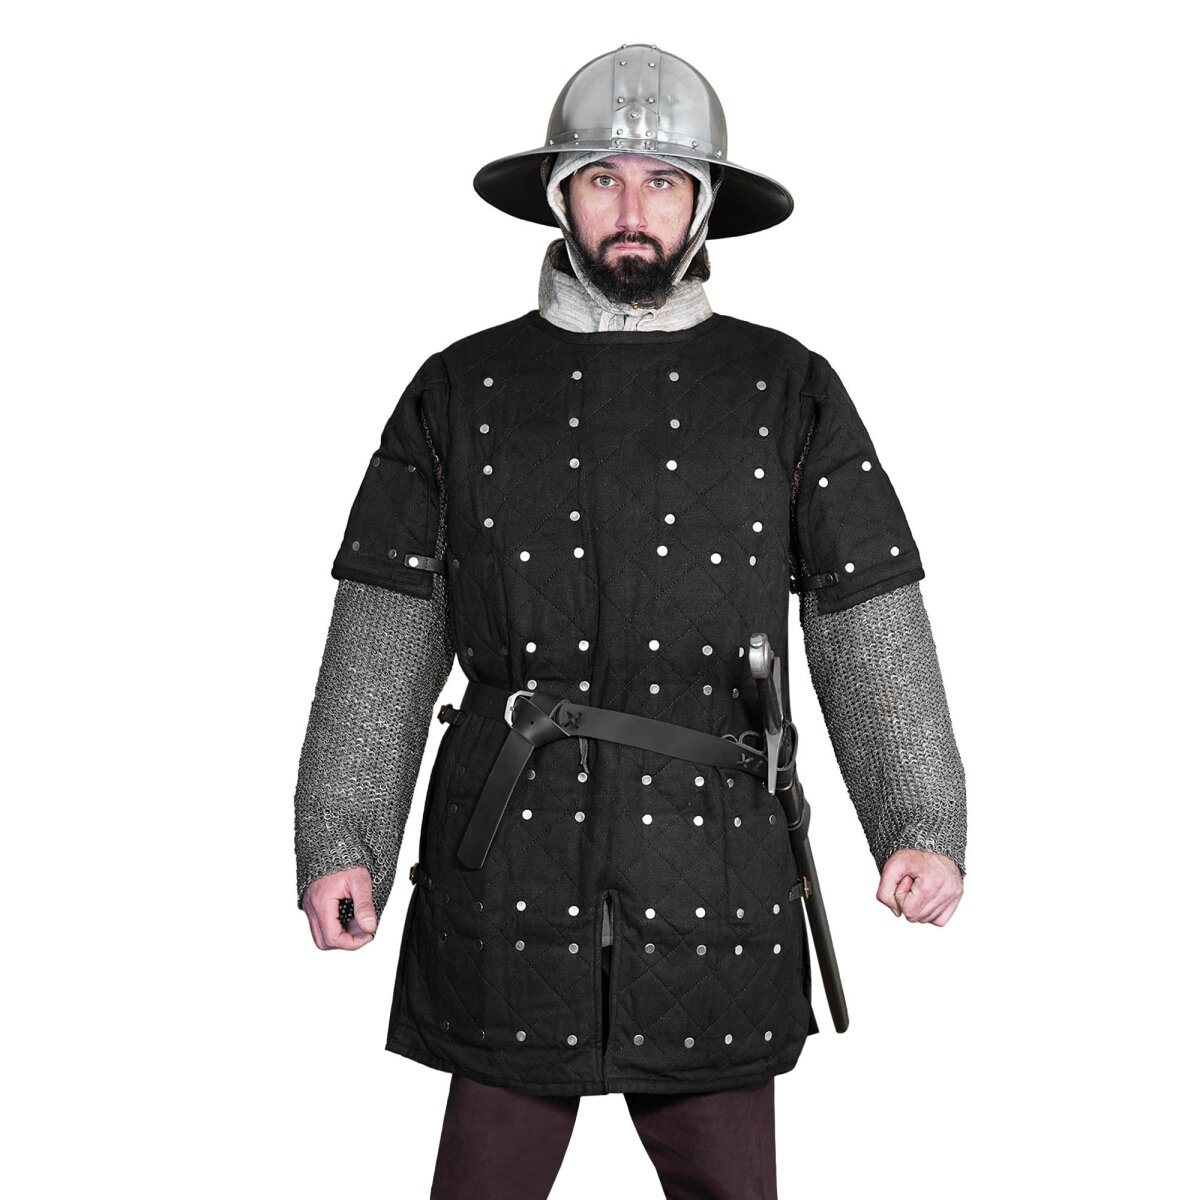 Medieval Brigandine with Riveted Steel Plates Body Armor...